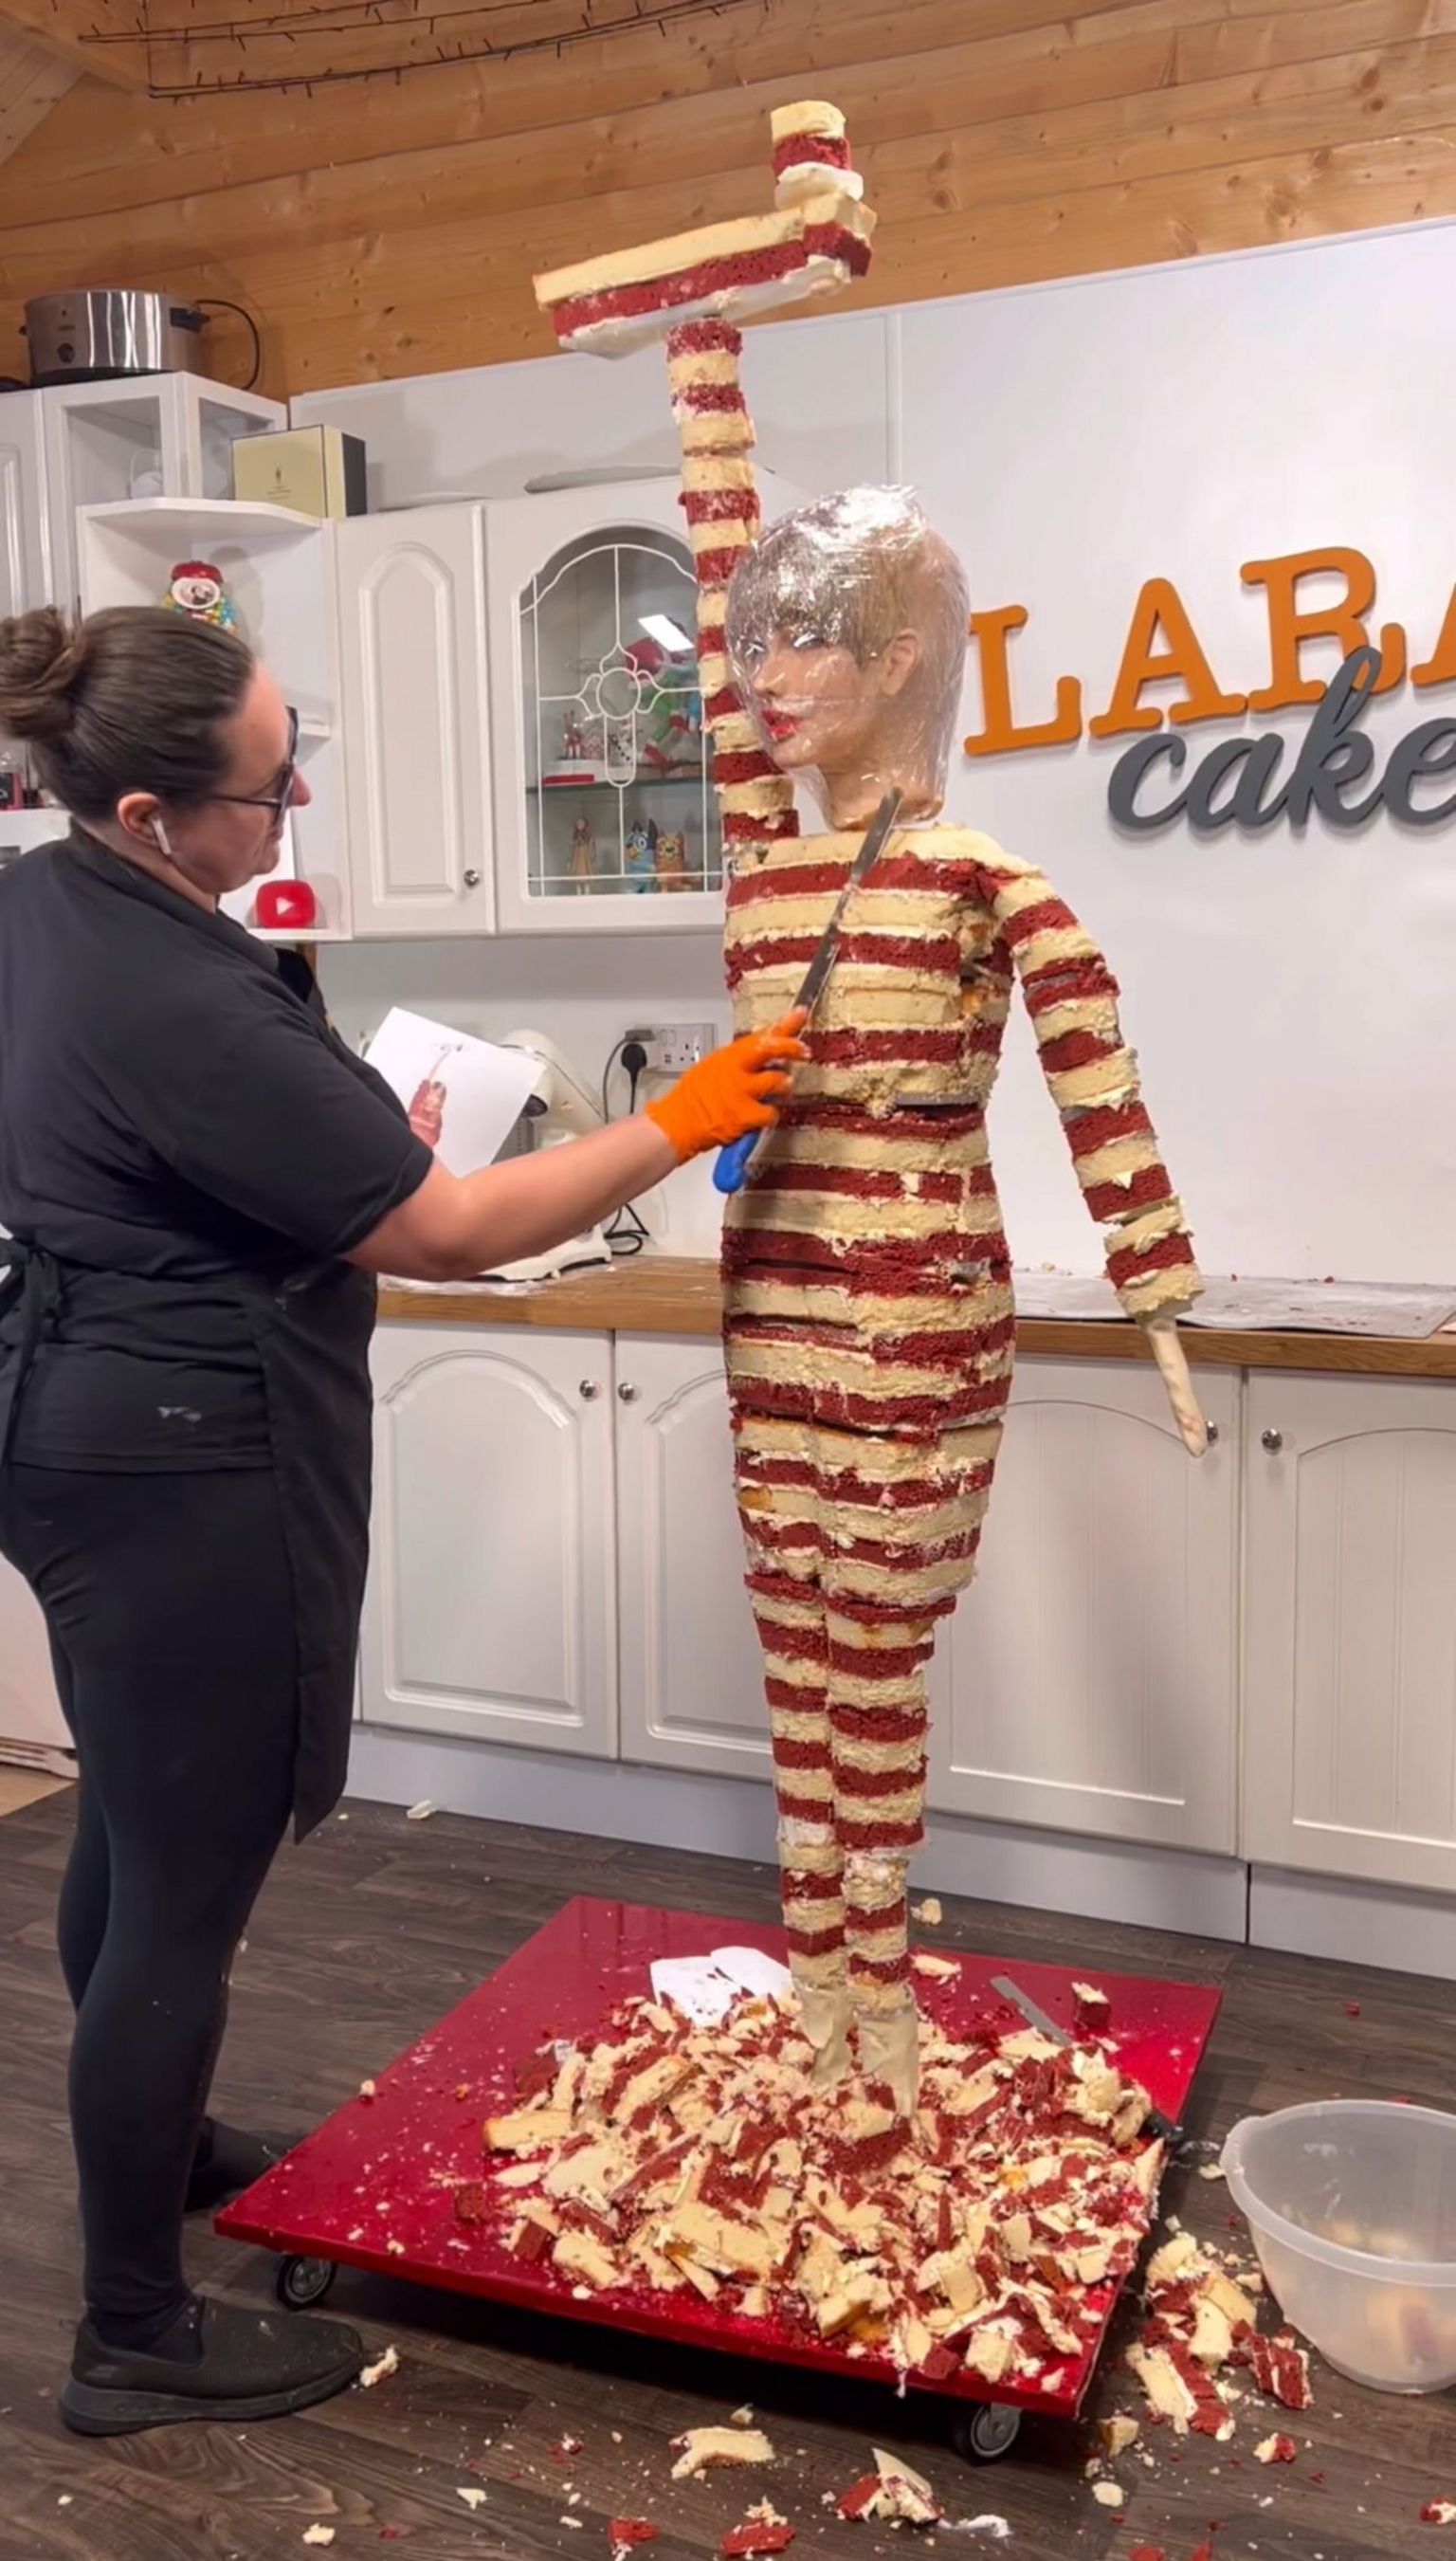 Lara Mason making the life-size cake, with the cake layers visible from the neck down